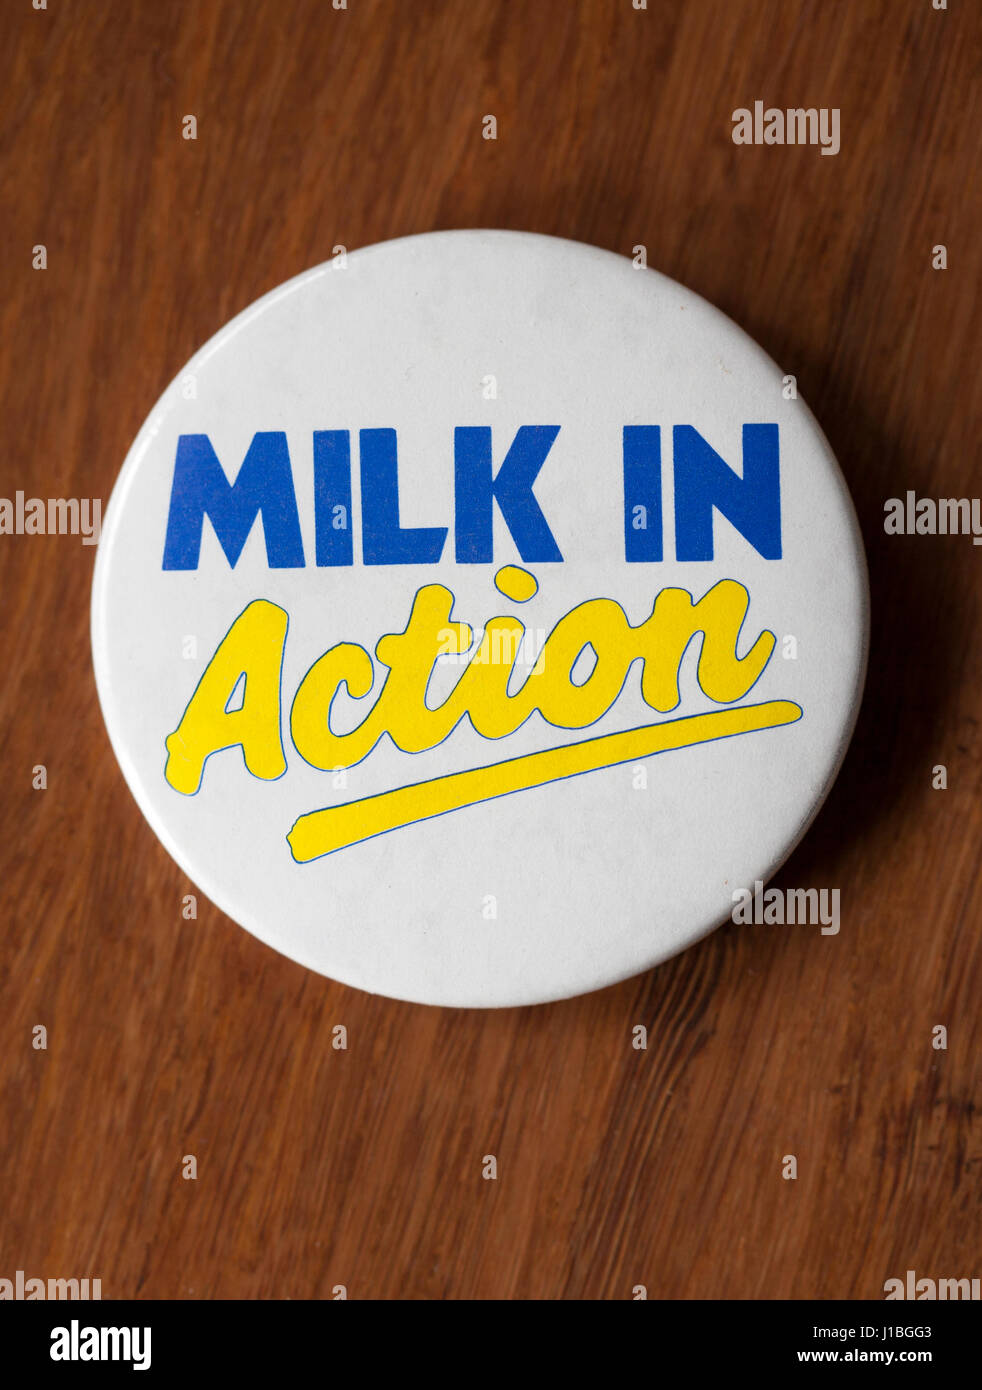 Vintage Milk in Action Badge - British Advertising Campaign Stock Photo